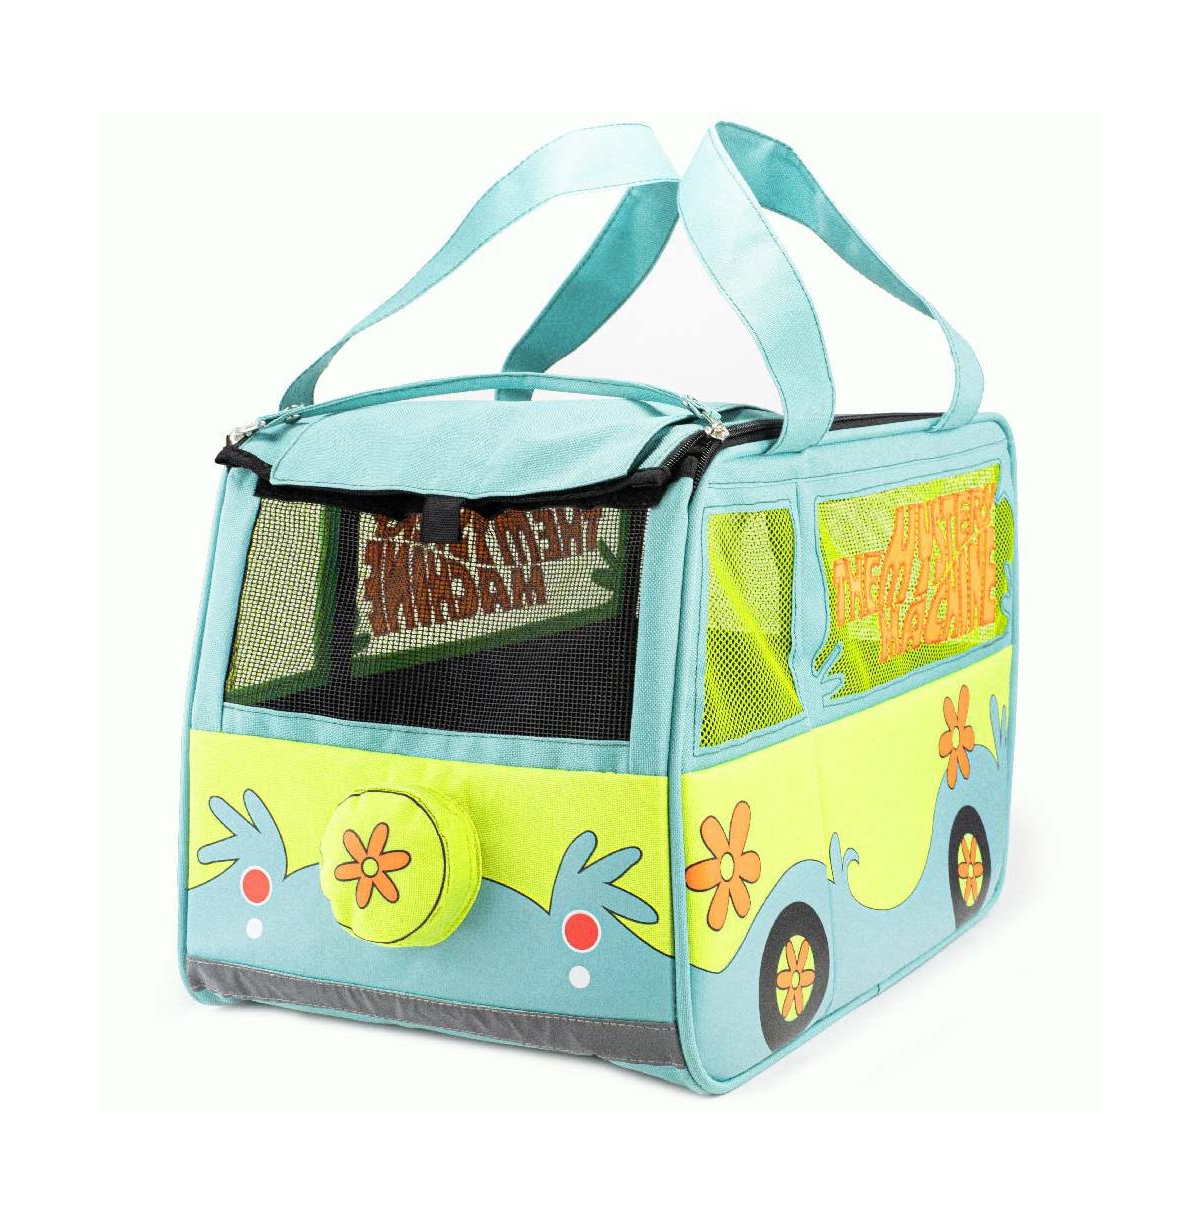 Scooby Doo Pet Carrier, The Mystery Machine, Dog Cat Bunny Carrying Case - Blue